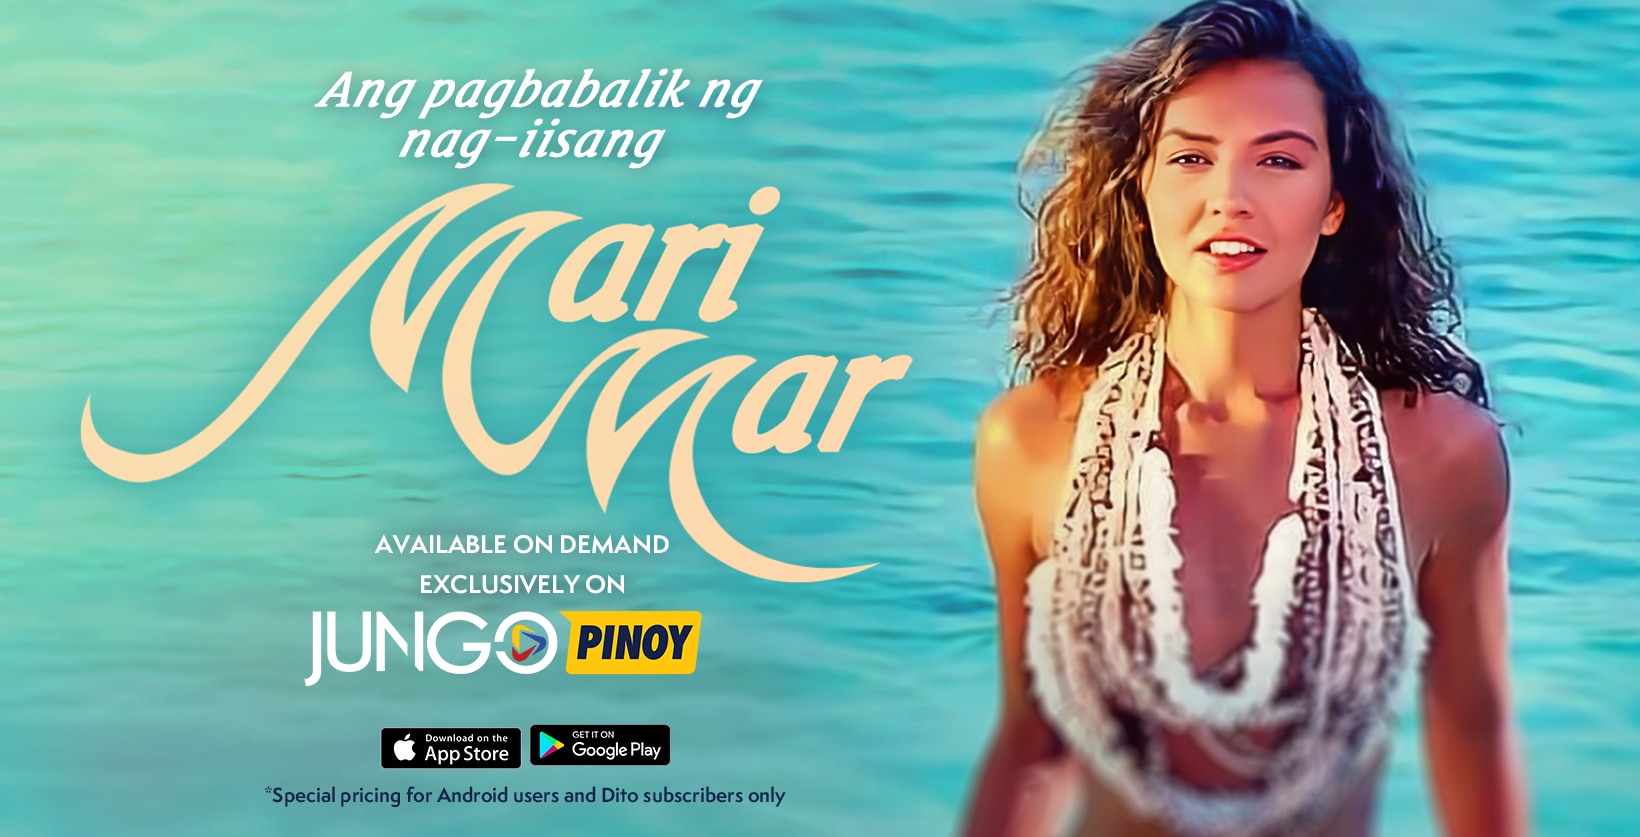 'Marimar' is making a highly anticipated comeback on Jungo Pinoy.